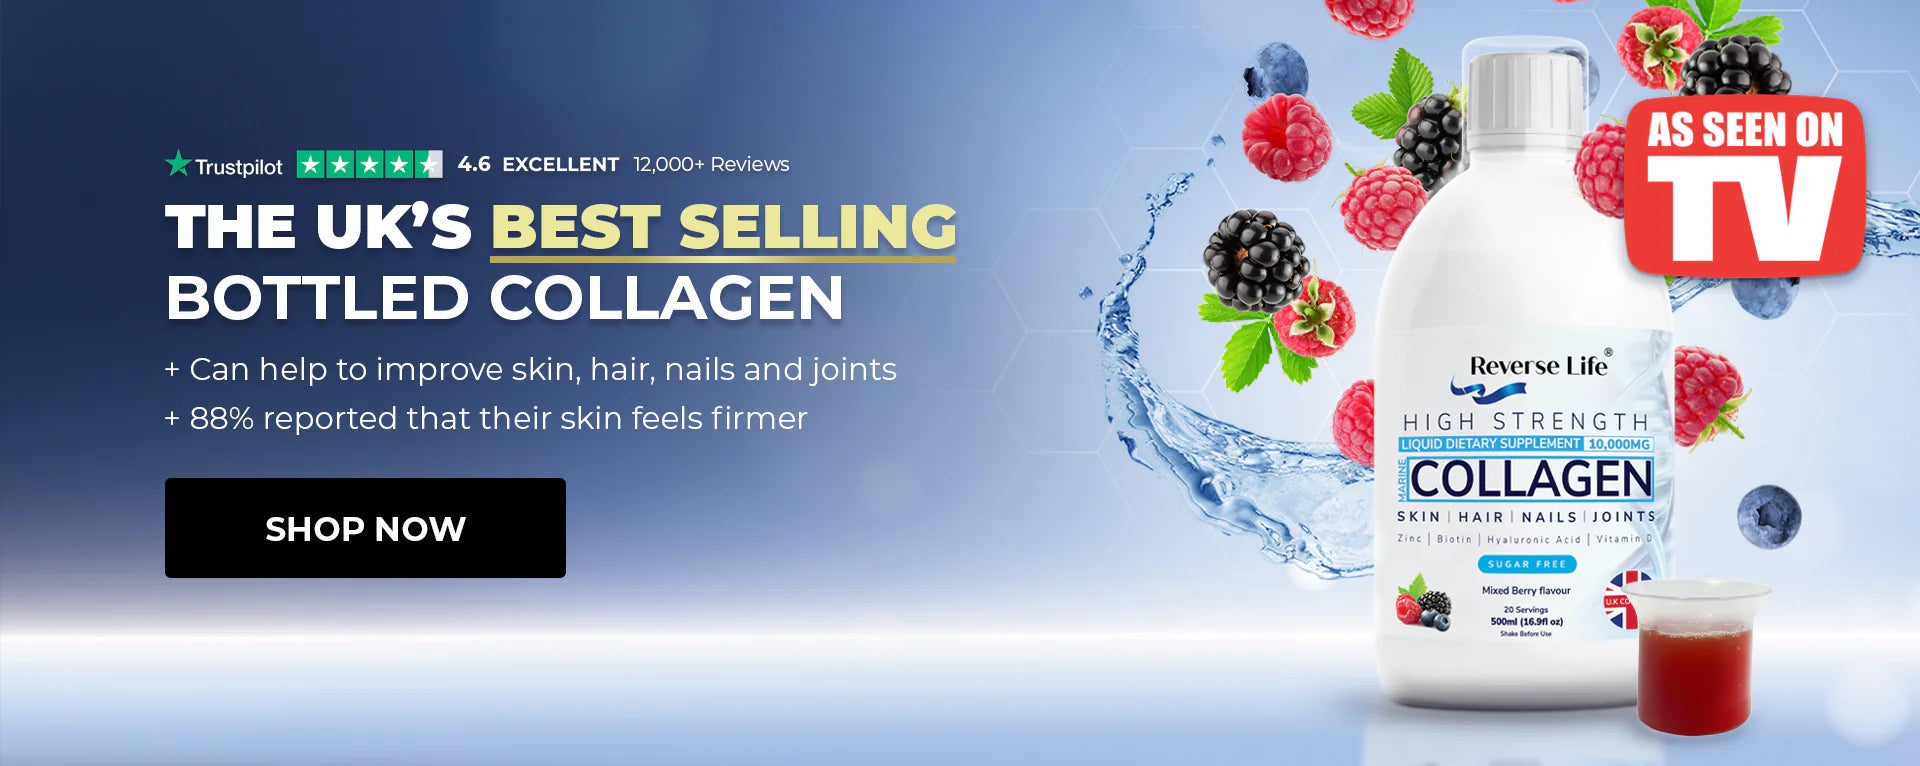 The UK's best selling bottled collagen. Can help to improve skin, hair, nails and joints. 88% reported that their skin feels firmer.